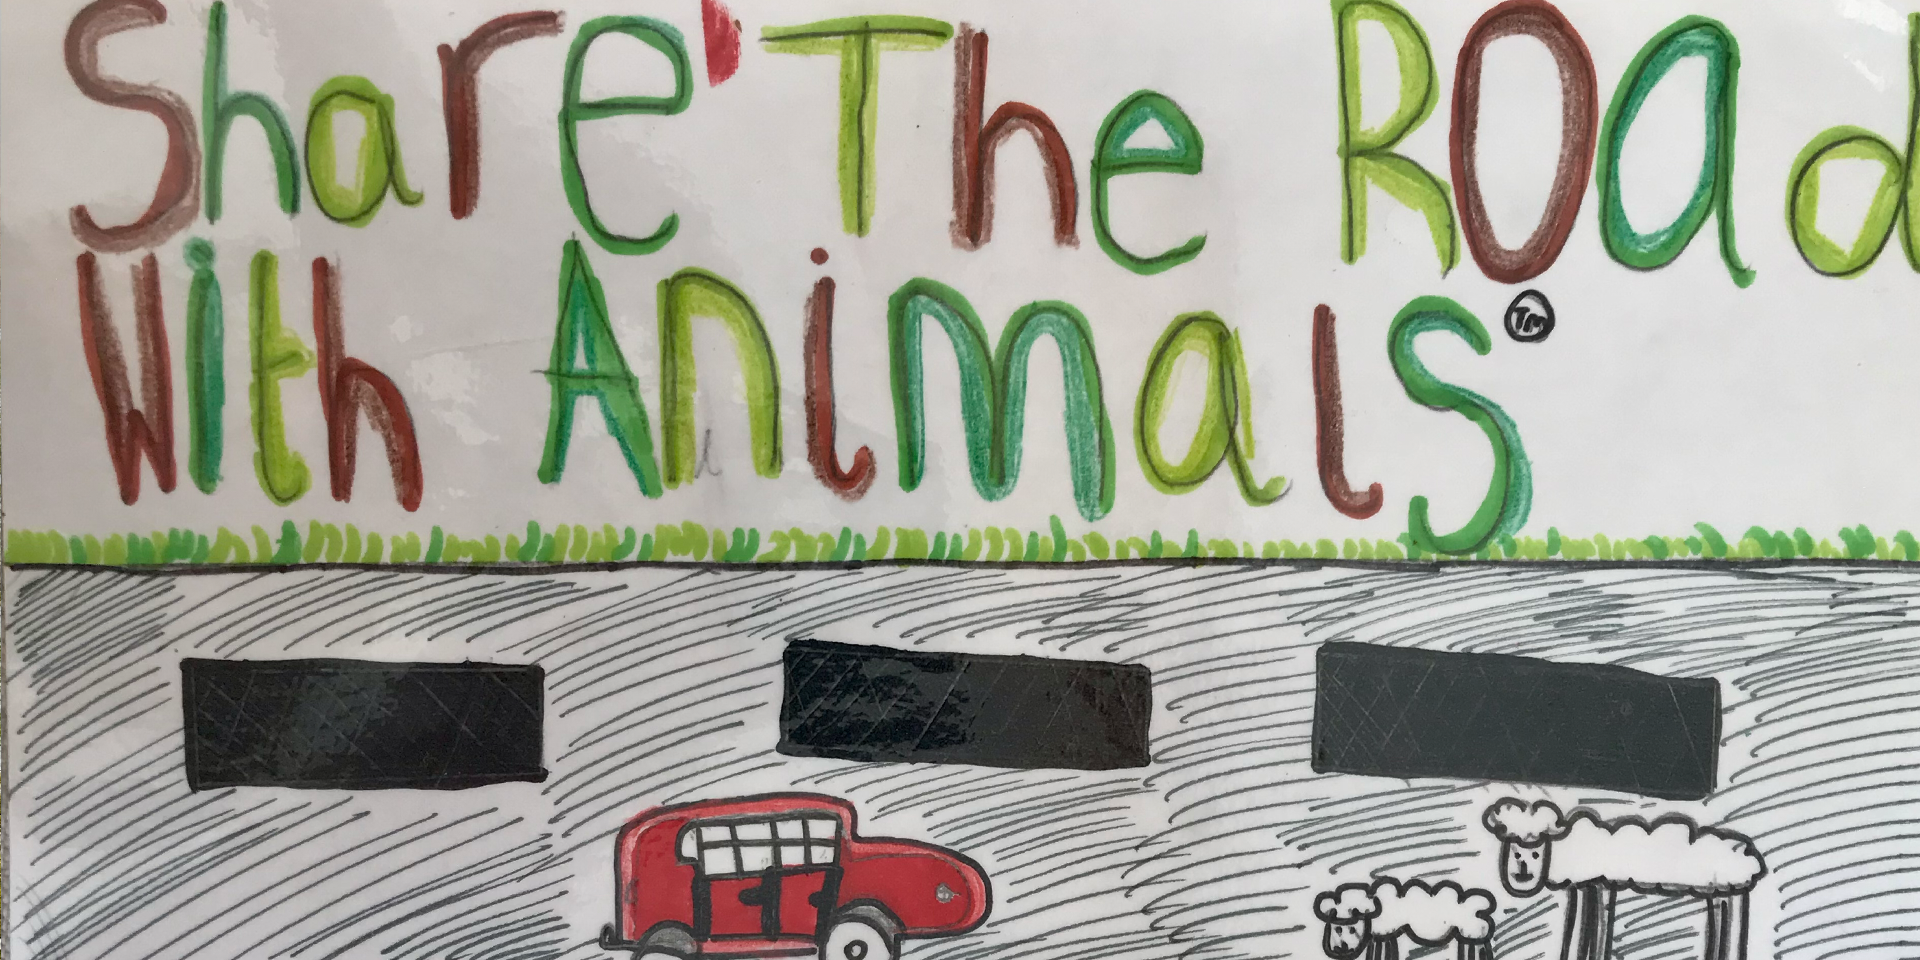 Share the roads with animals, drawing by children shows sheep and car on a road